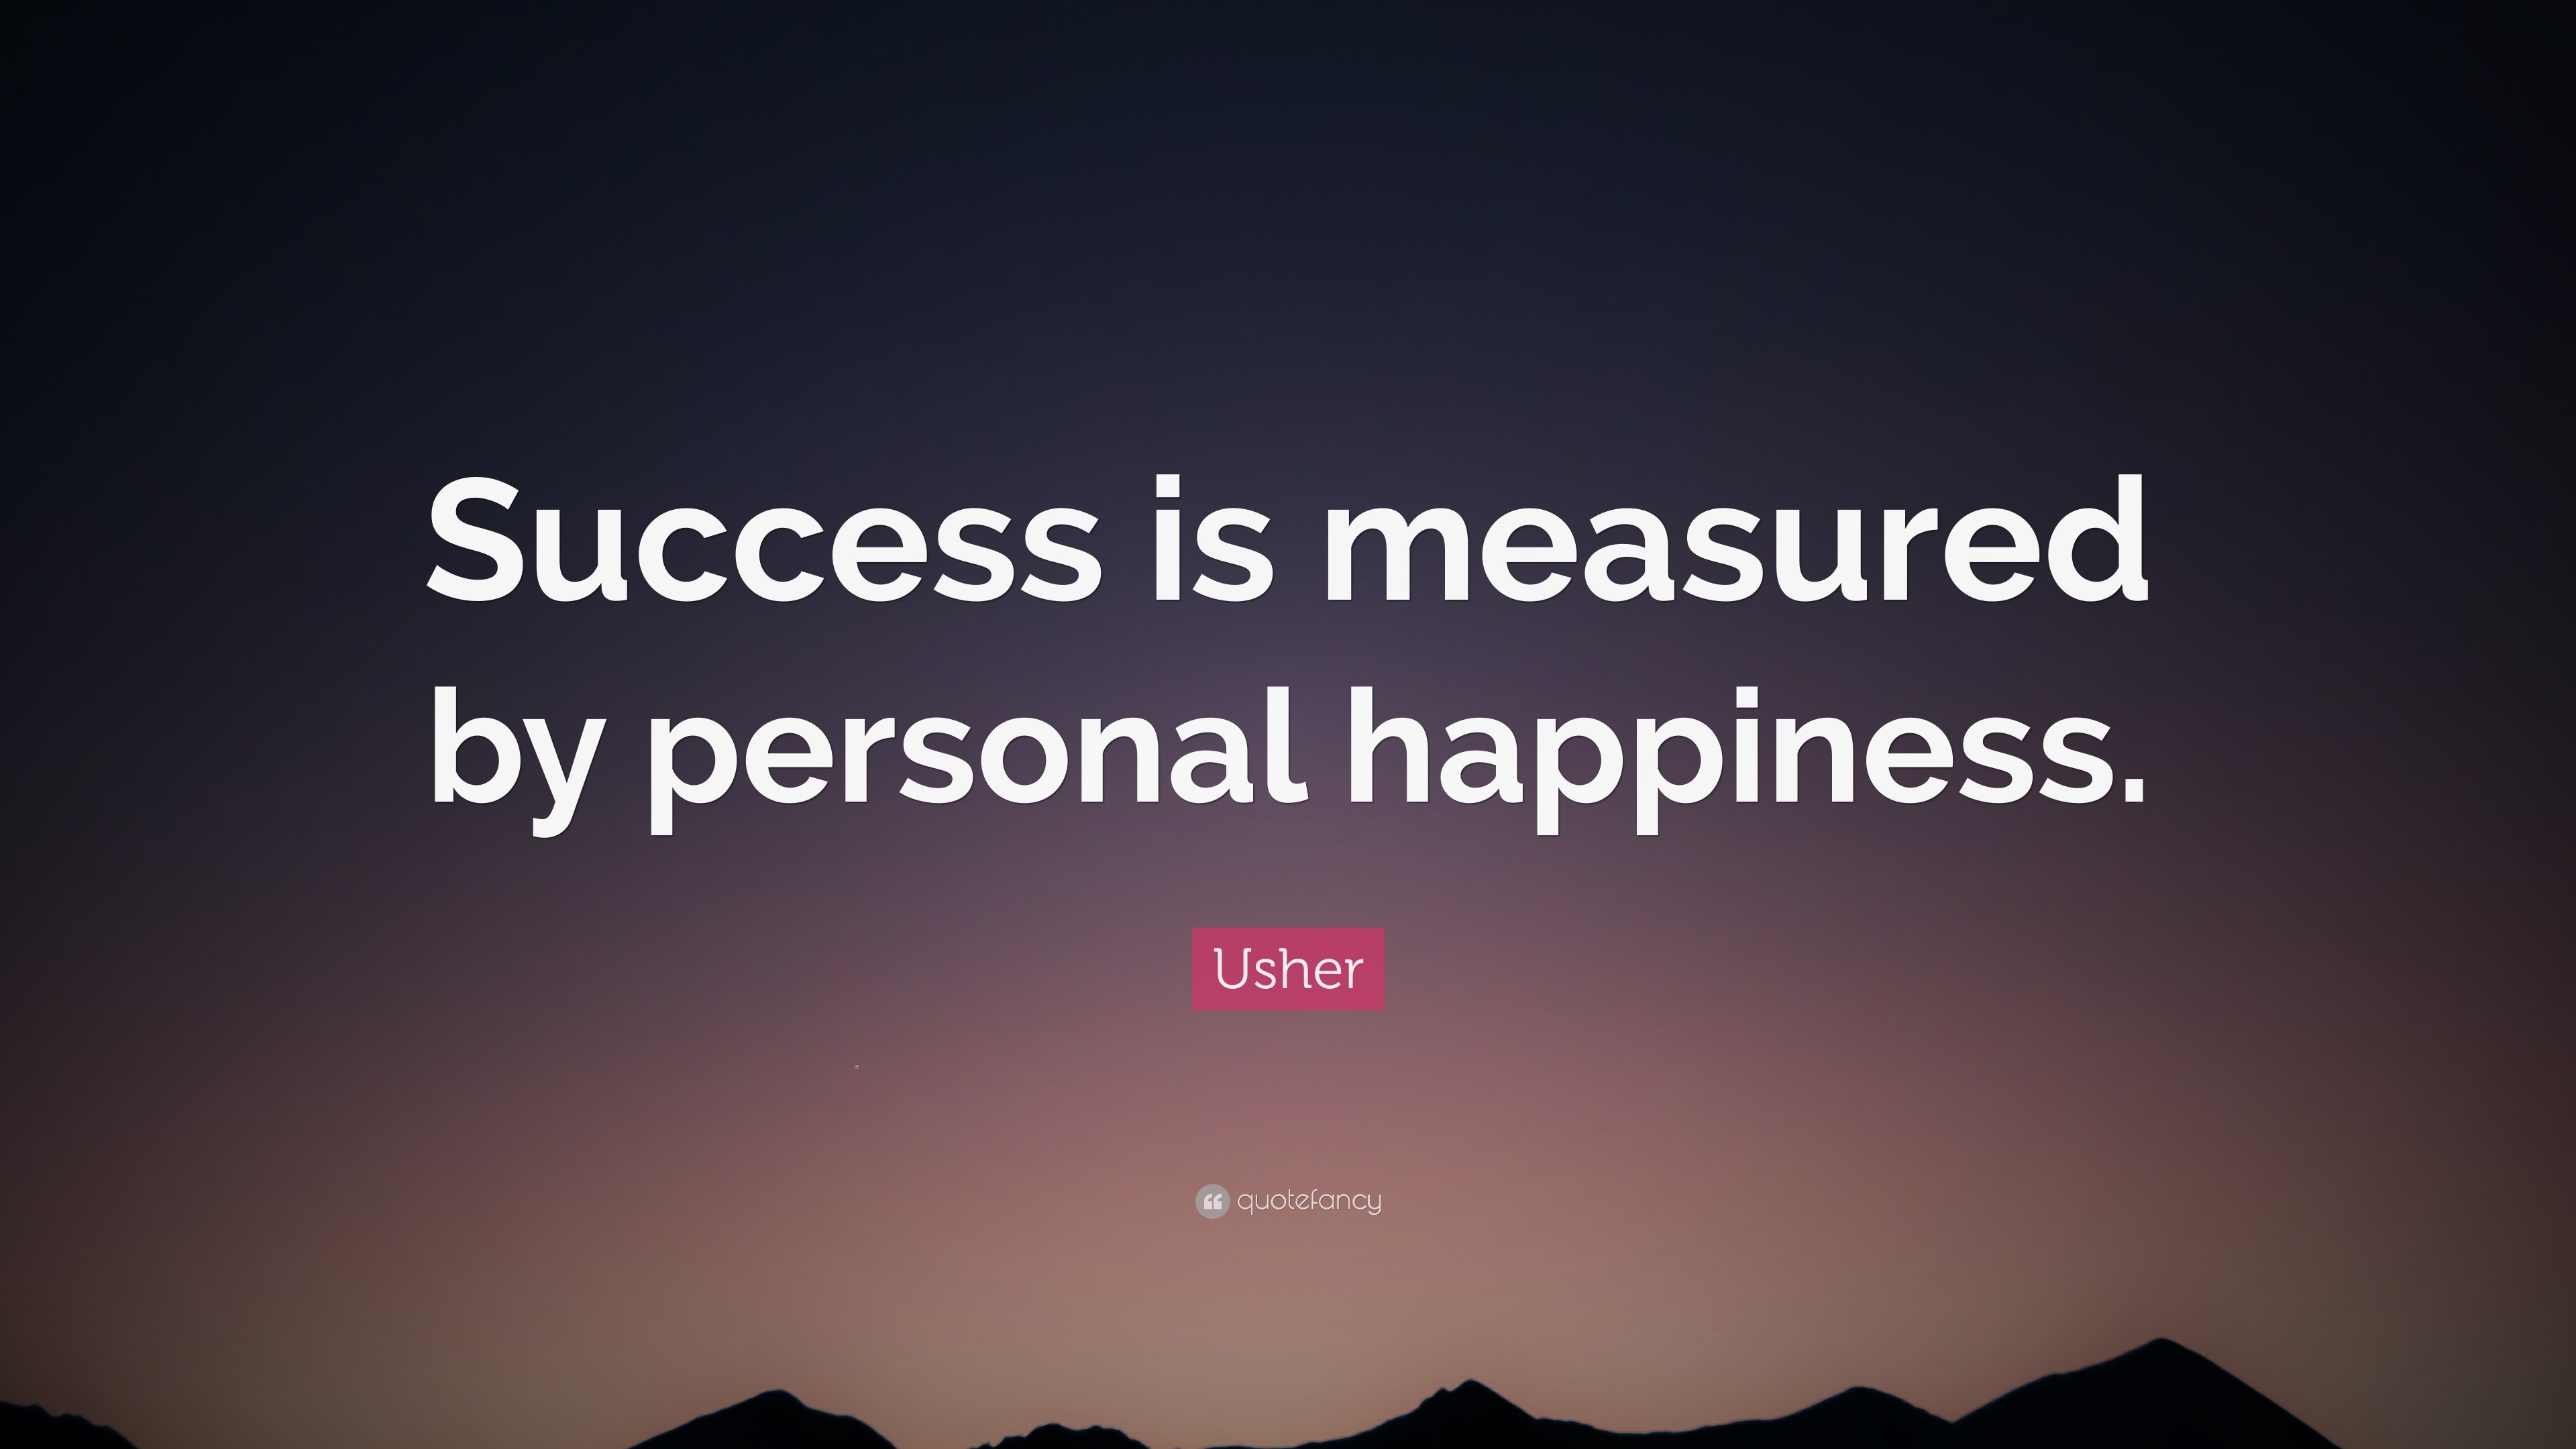 3840x2160 Usher Quote: “Success is measured by personal happiness.”